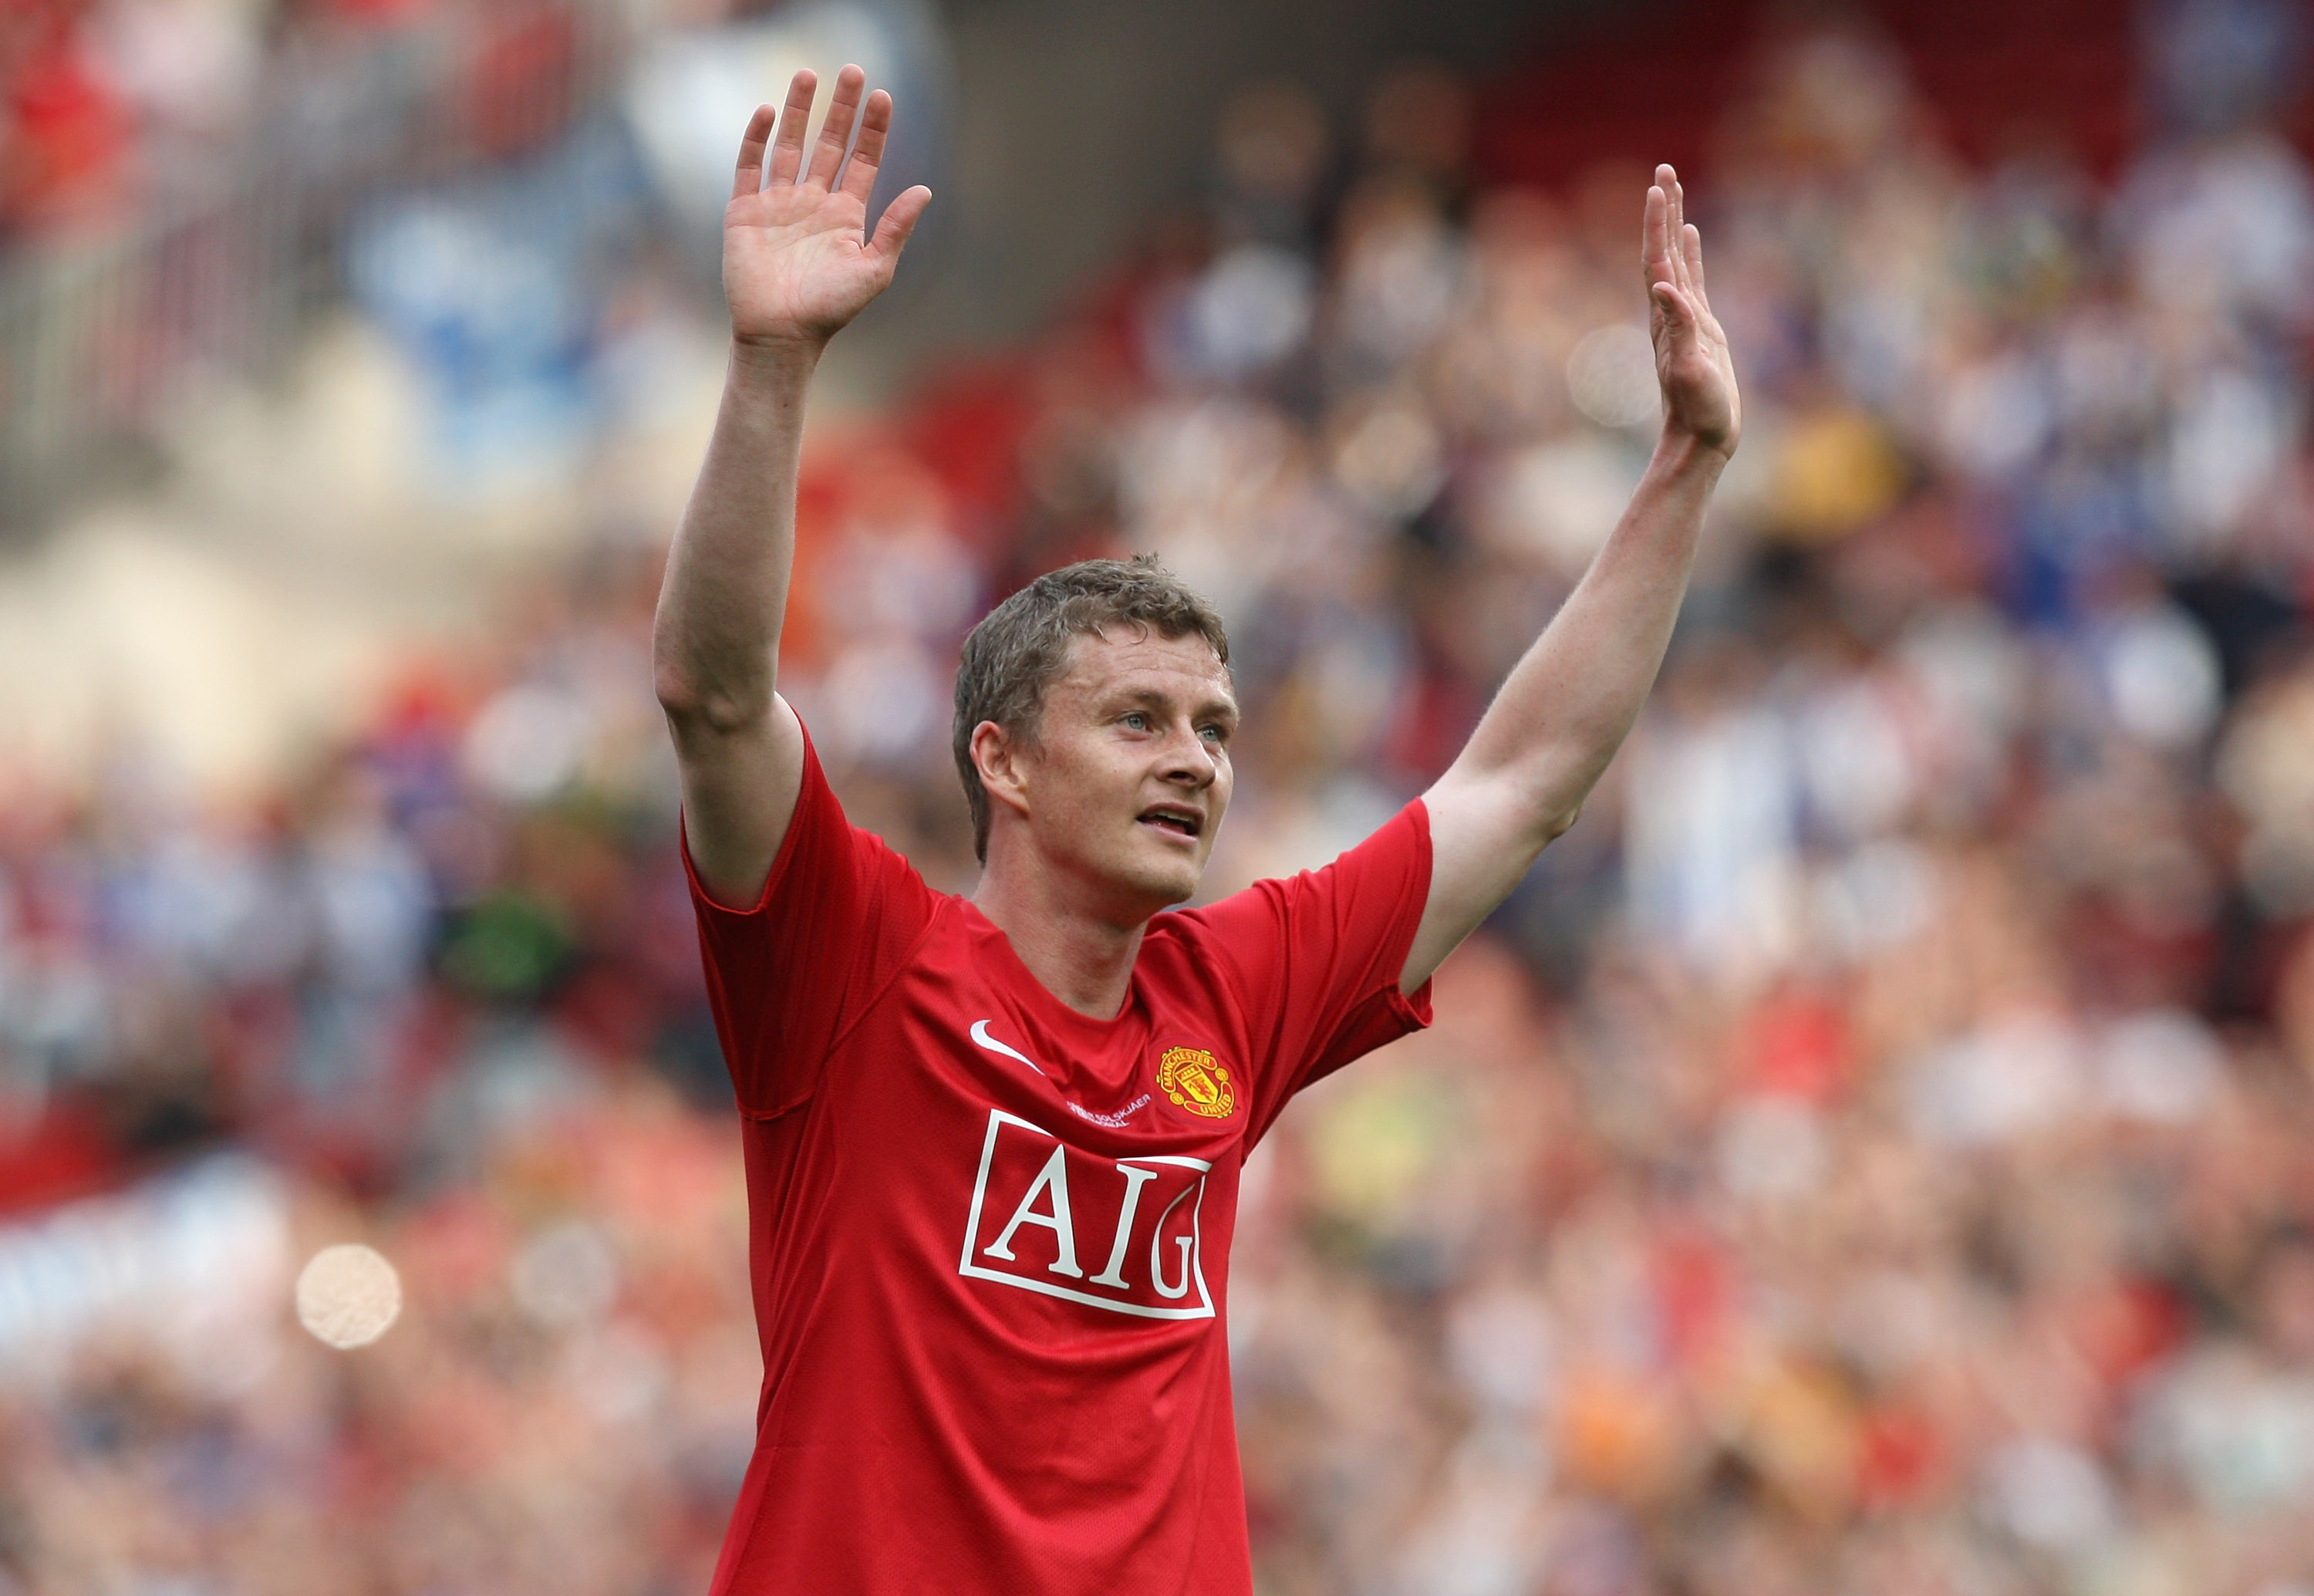 MANCHESTER, UNITED KINGDOM - AUGUST 02:  Ole Gunnar Solskjaer of Manchester United acknowledges the crowd after his testimonial friendly match between Manchester United and Espanyol at Old Trafford on August 2, 2008 in Manchester, England.  (Photo by Davi